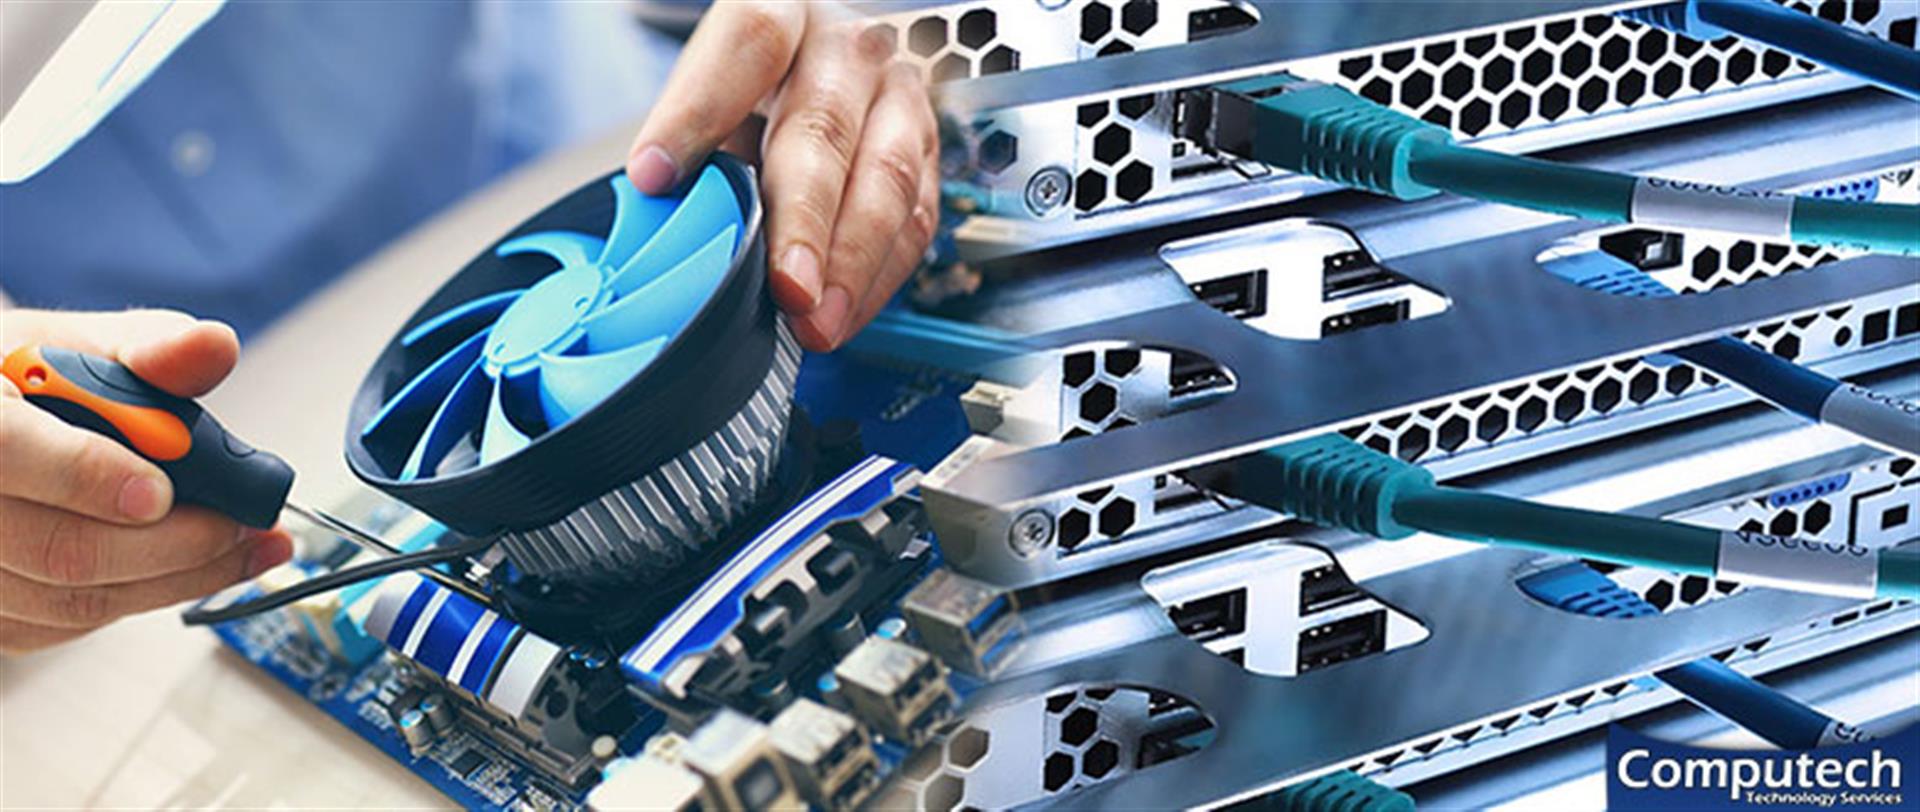 Lovettsville Virginia On-Site PC & Printer Repair, Networking, Voice & Data Cabling Solutions